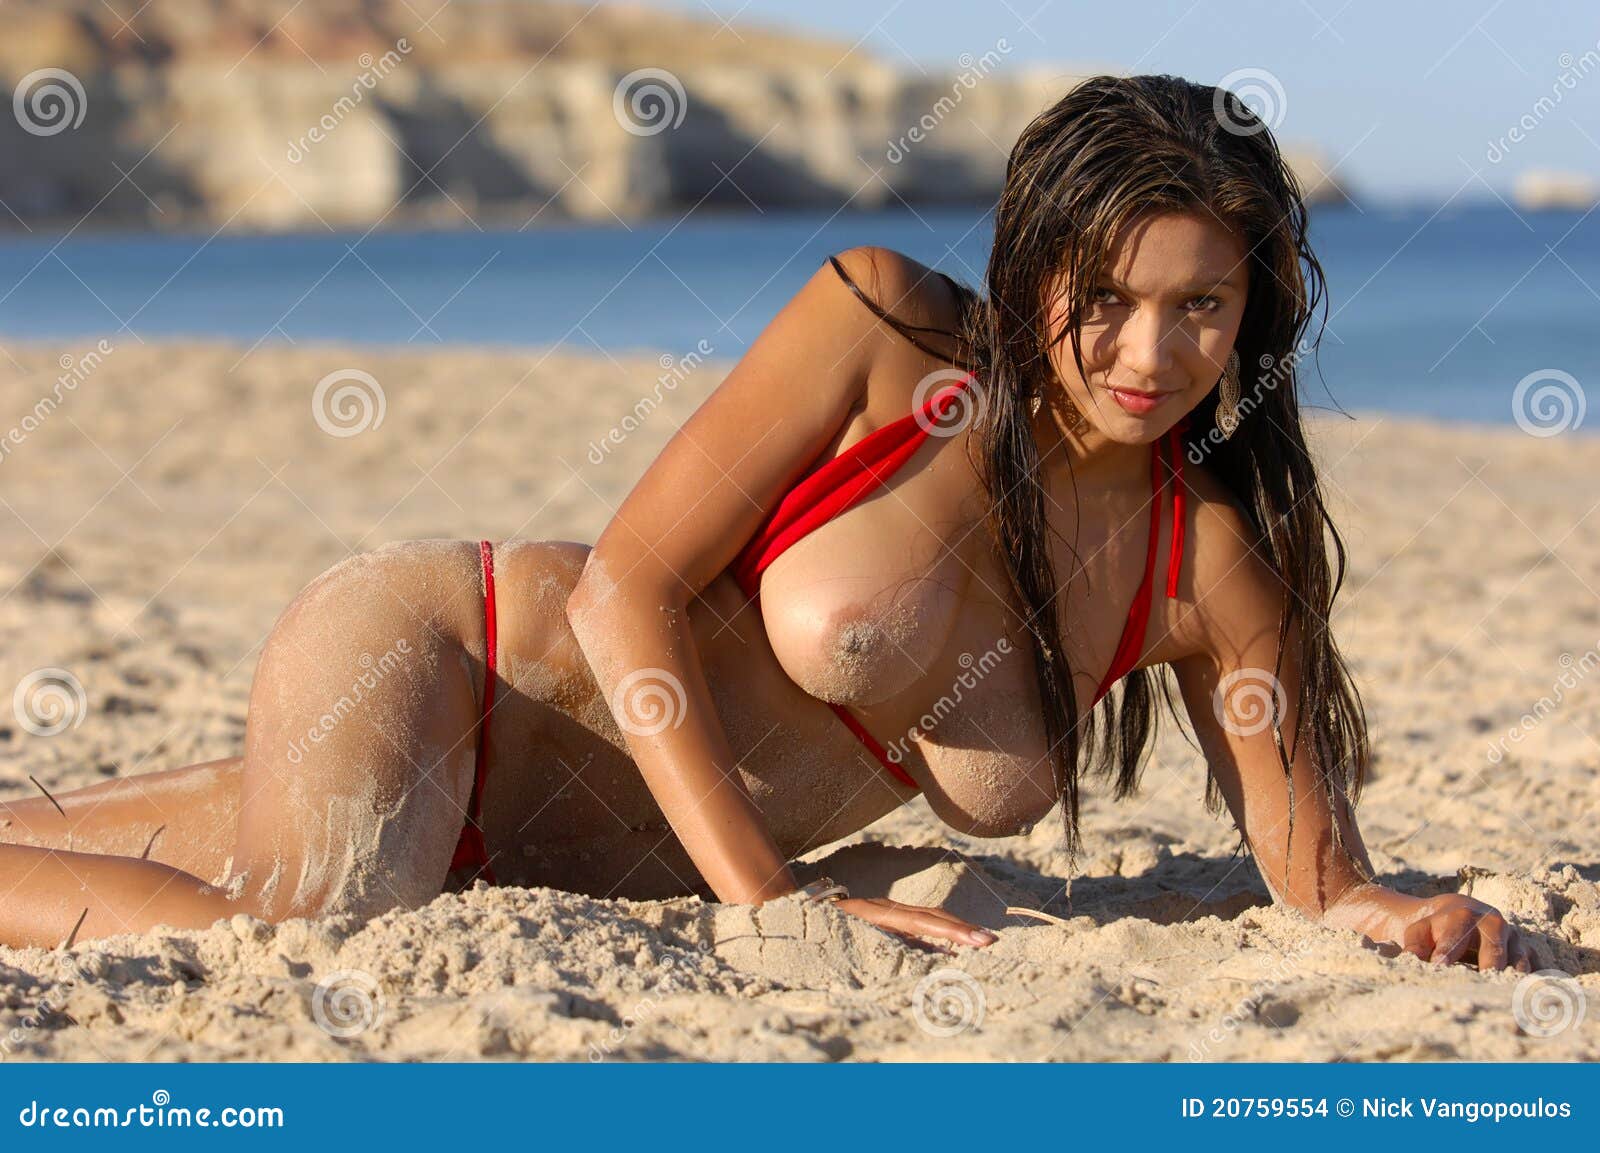 Beach pics topless Awesome Photos